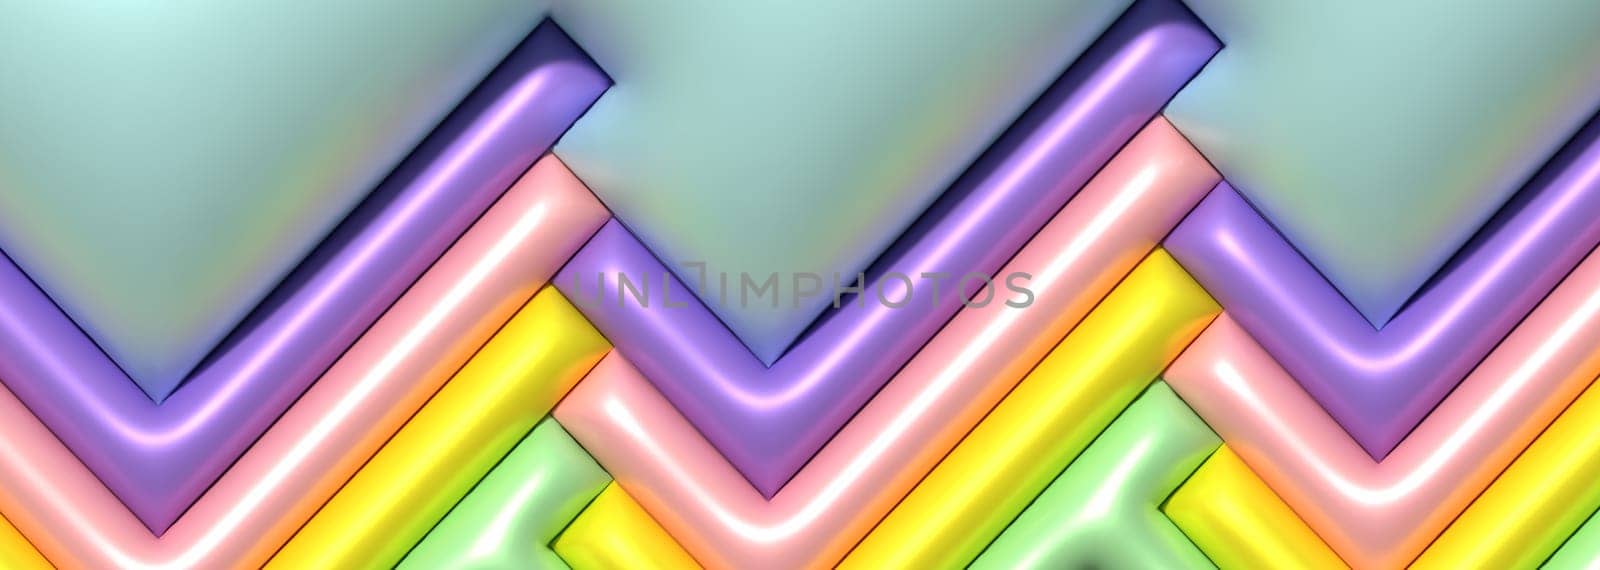 Background with inflated shapes, 3D rendering illustration